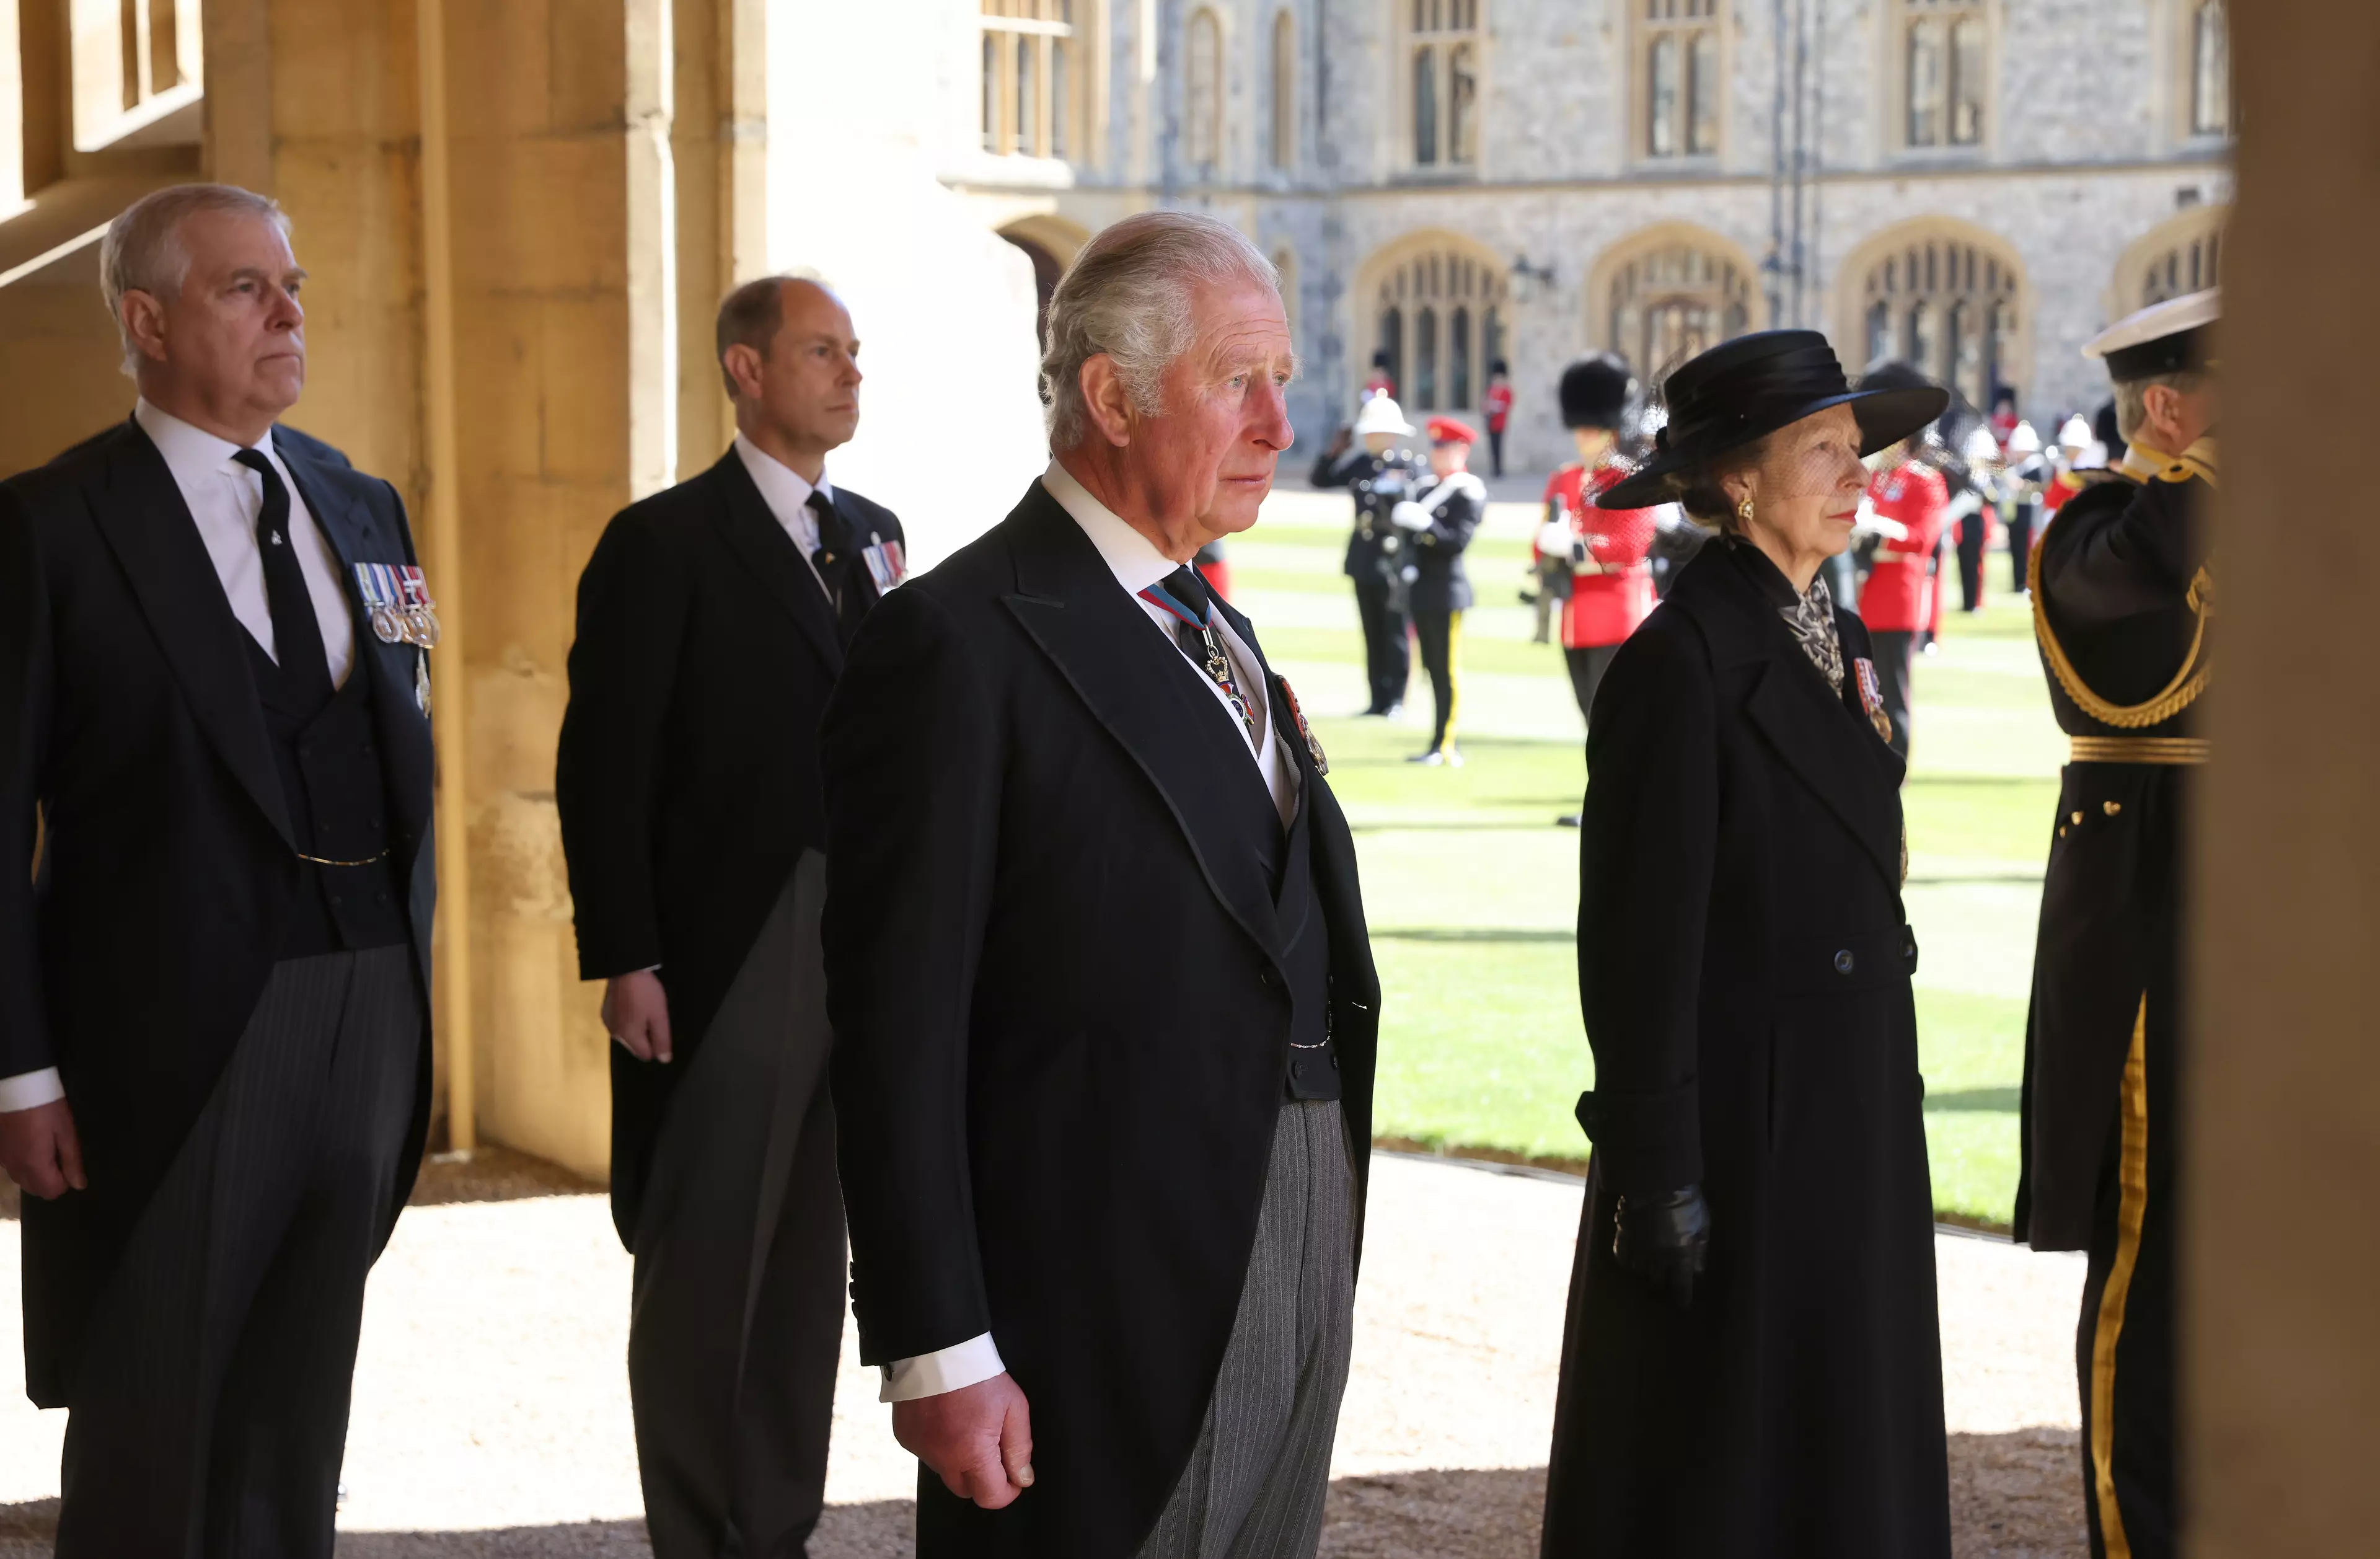 All senior members of the royal family were in attendance (